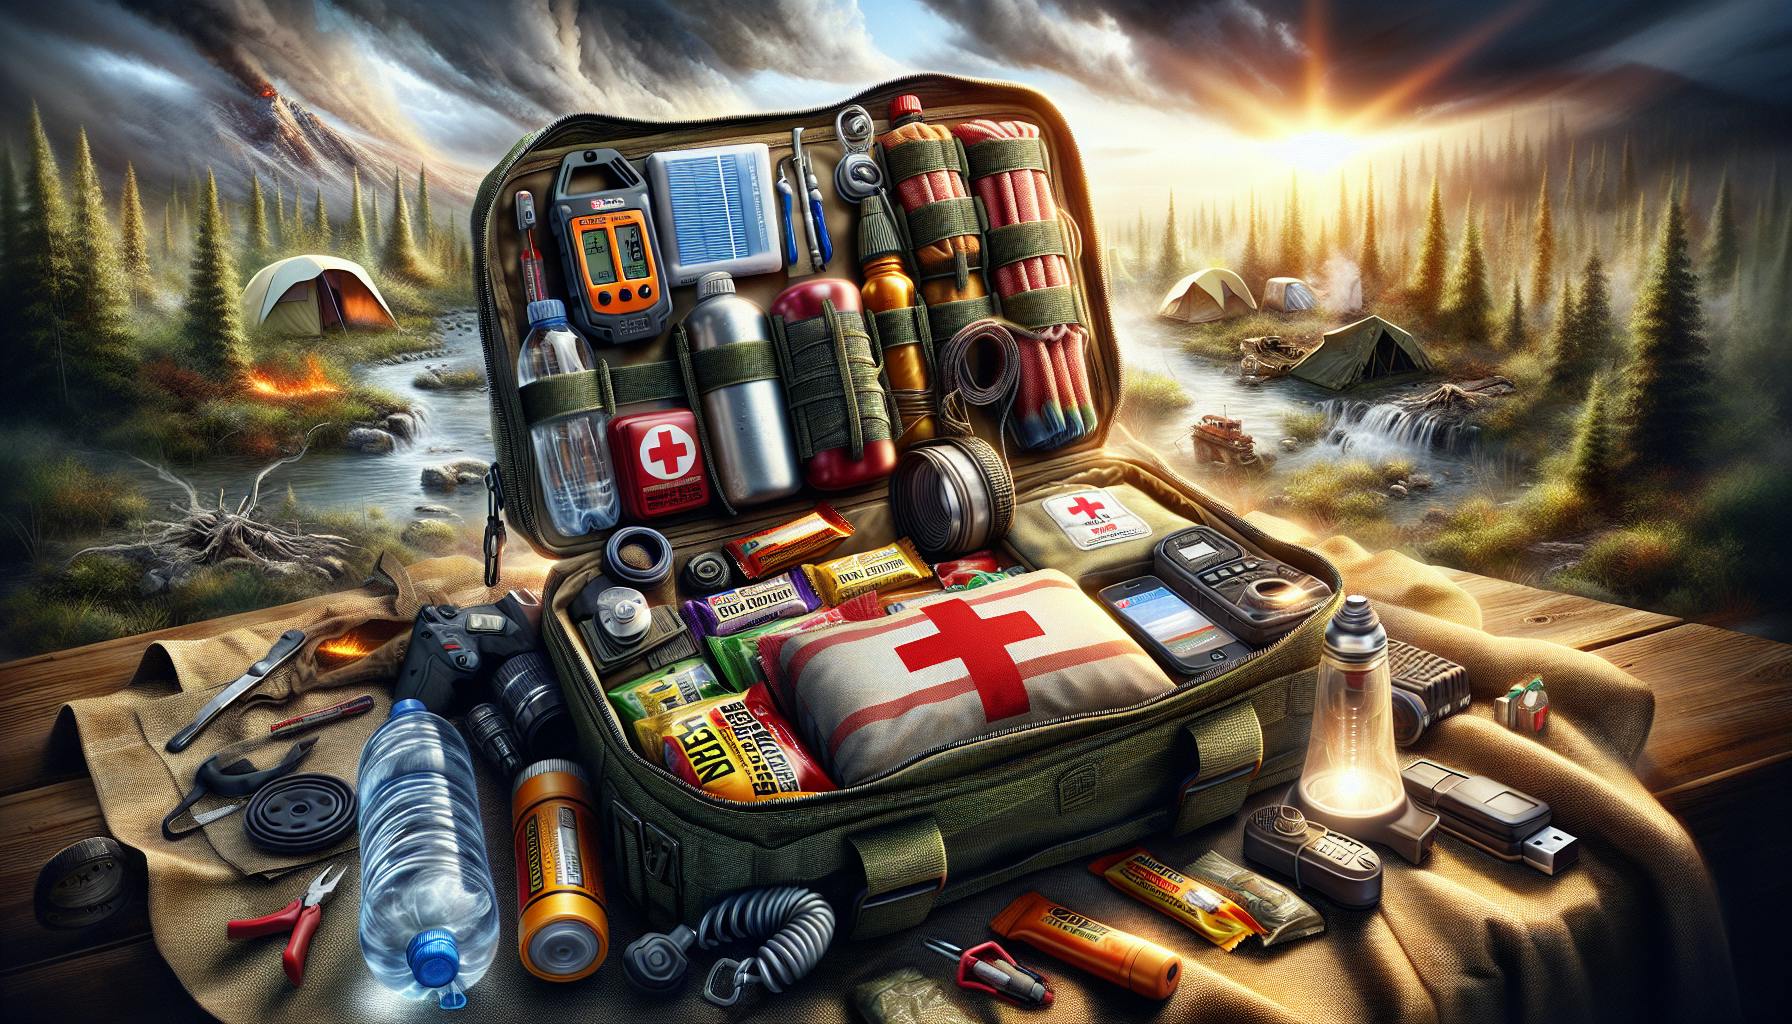 Essential Bug Out Bag Contents Guide